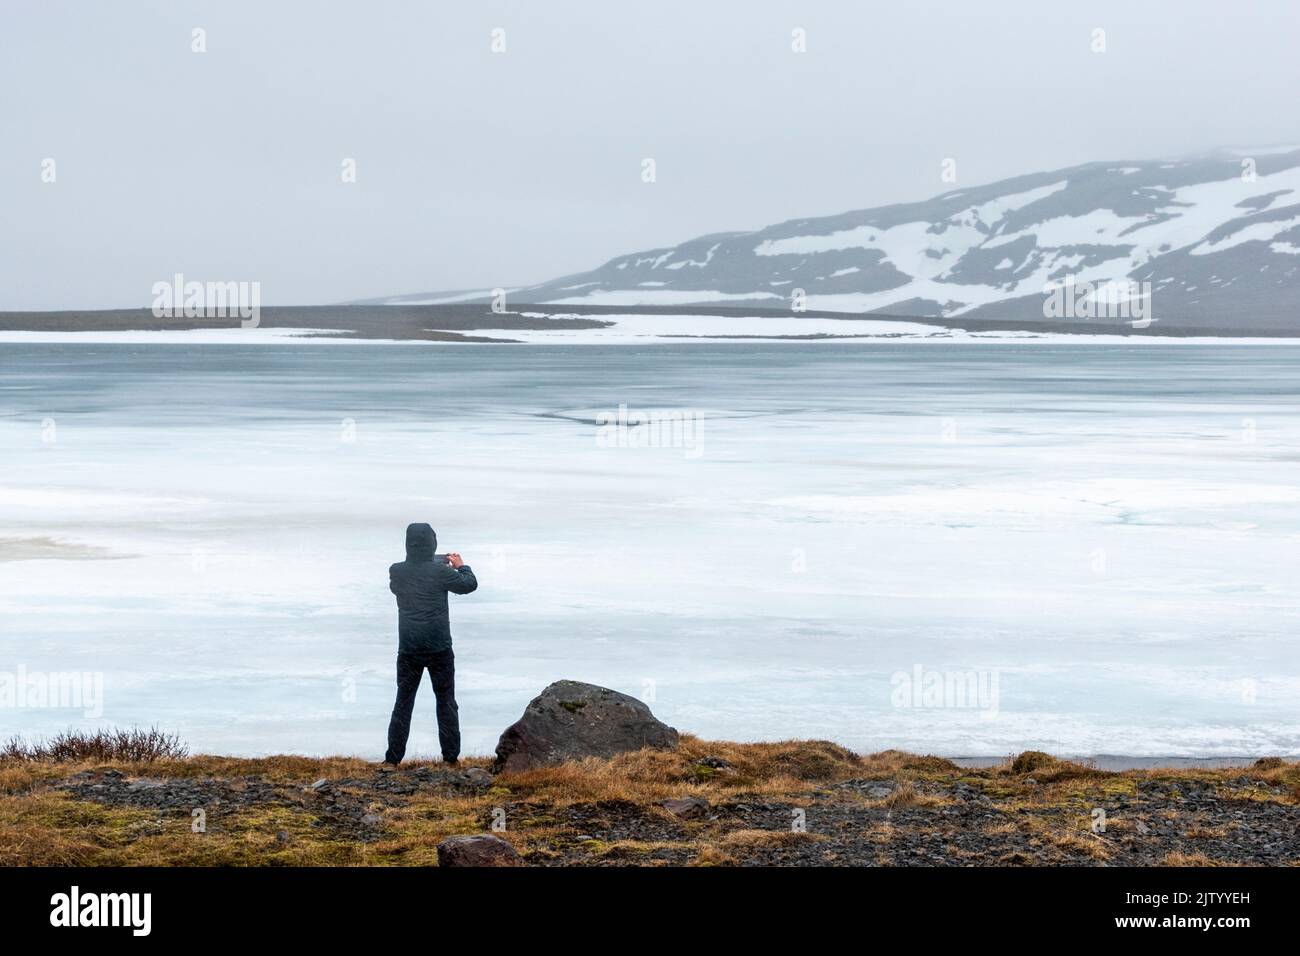 Man stopped by the side of a frozen lake in Iceland. Stock Photo